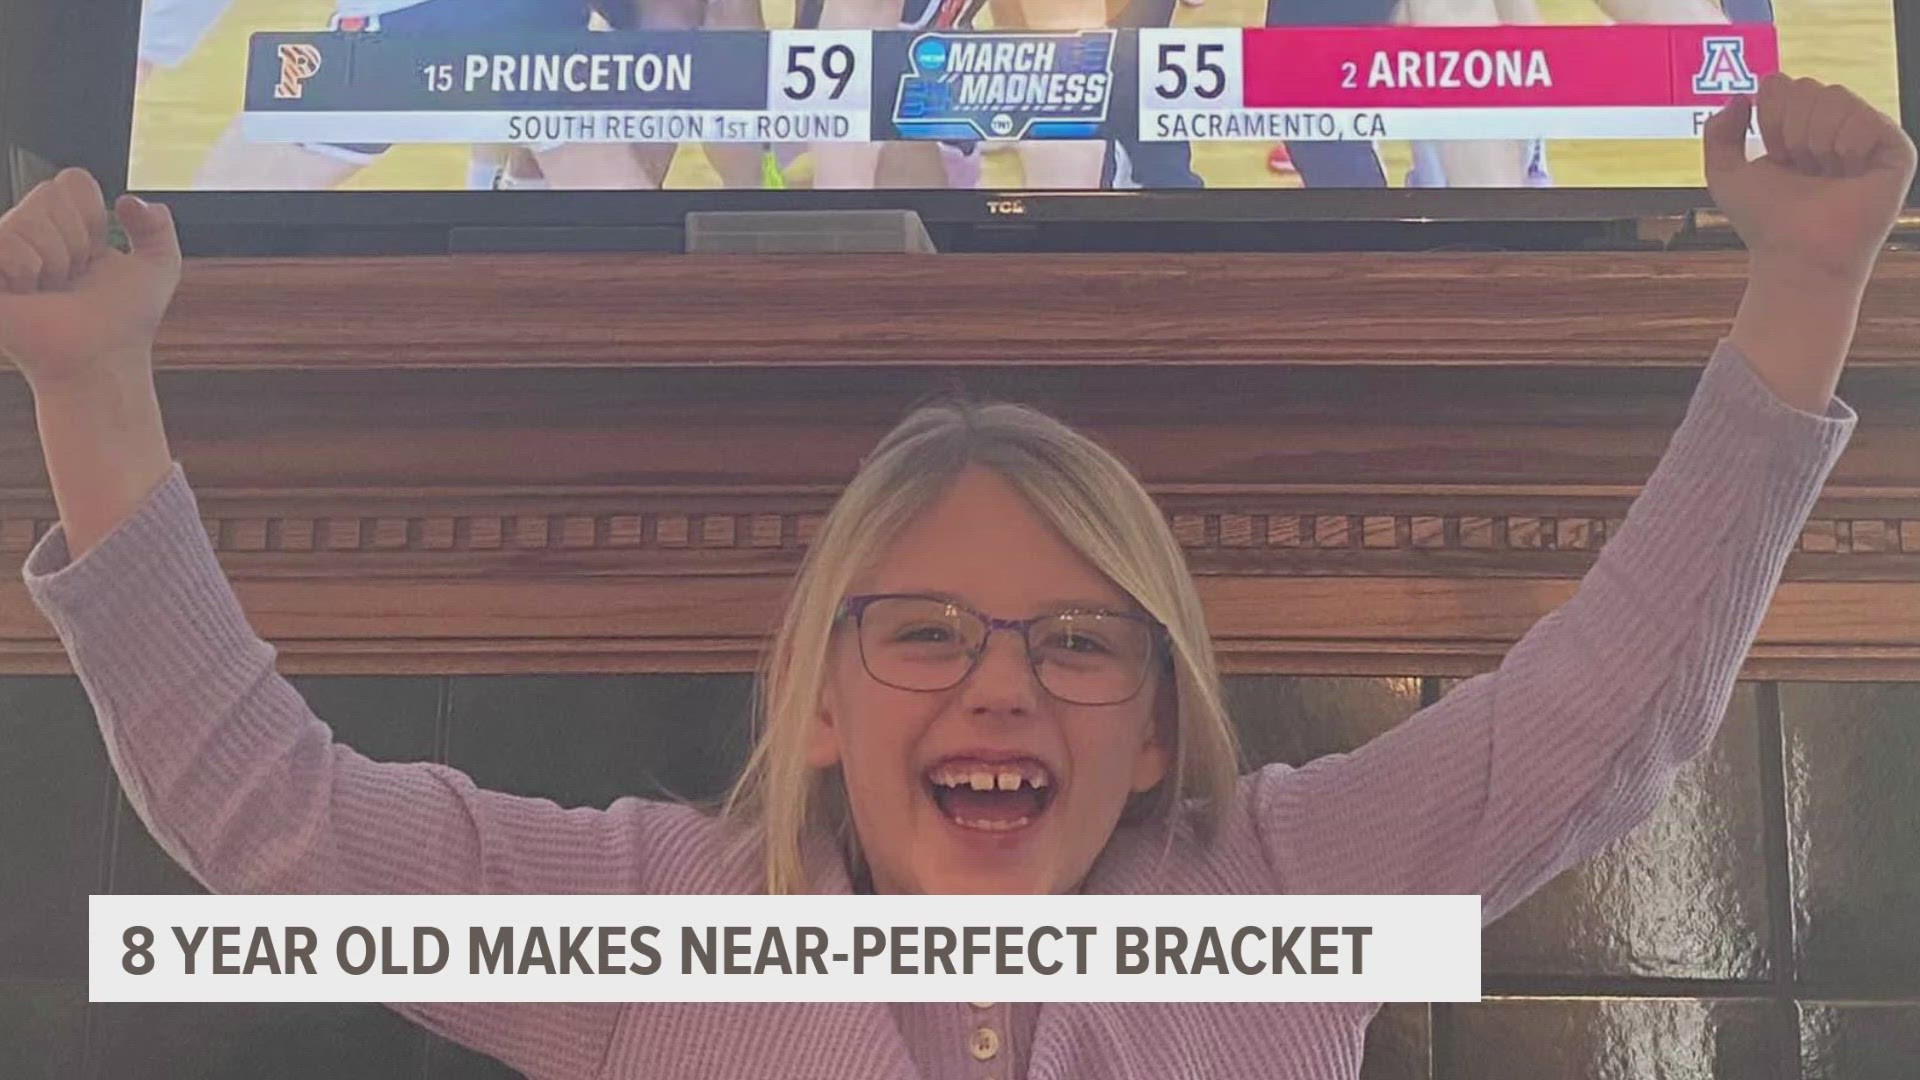 Hannah Nelson had a perfect bracket, up until the Iowa game. Out of 20 million Americans who filled out a bracket, Hannah was one of 18,000 to make it that far.